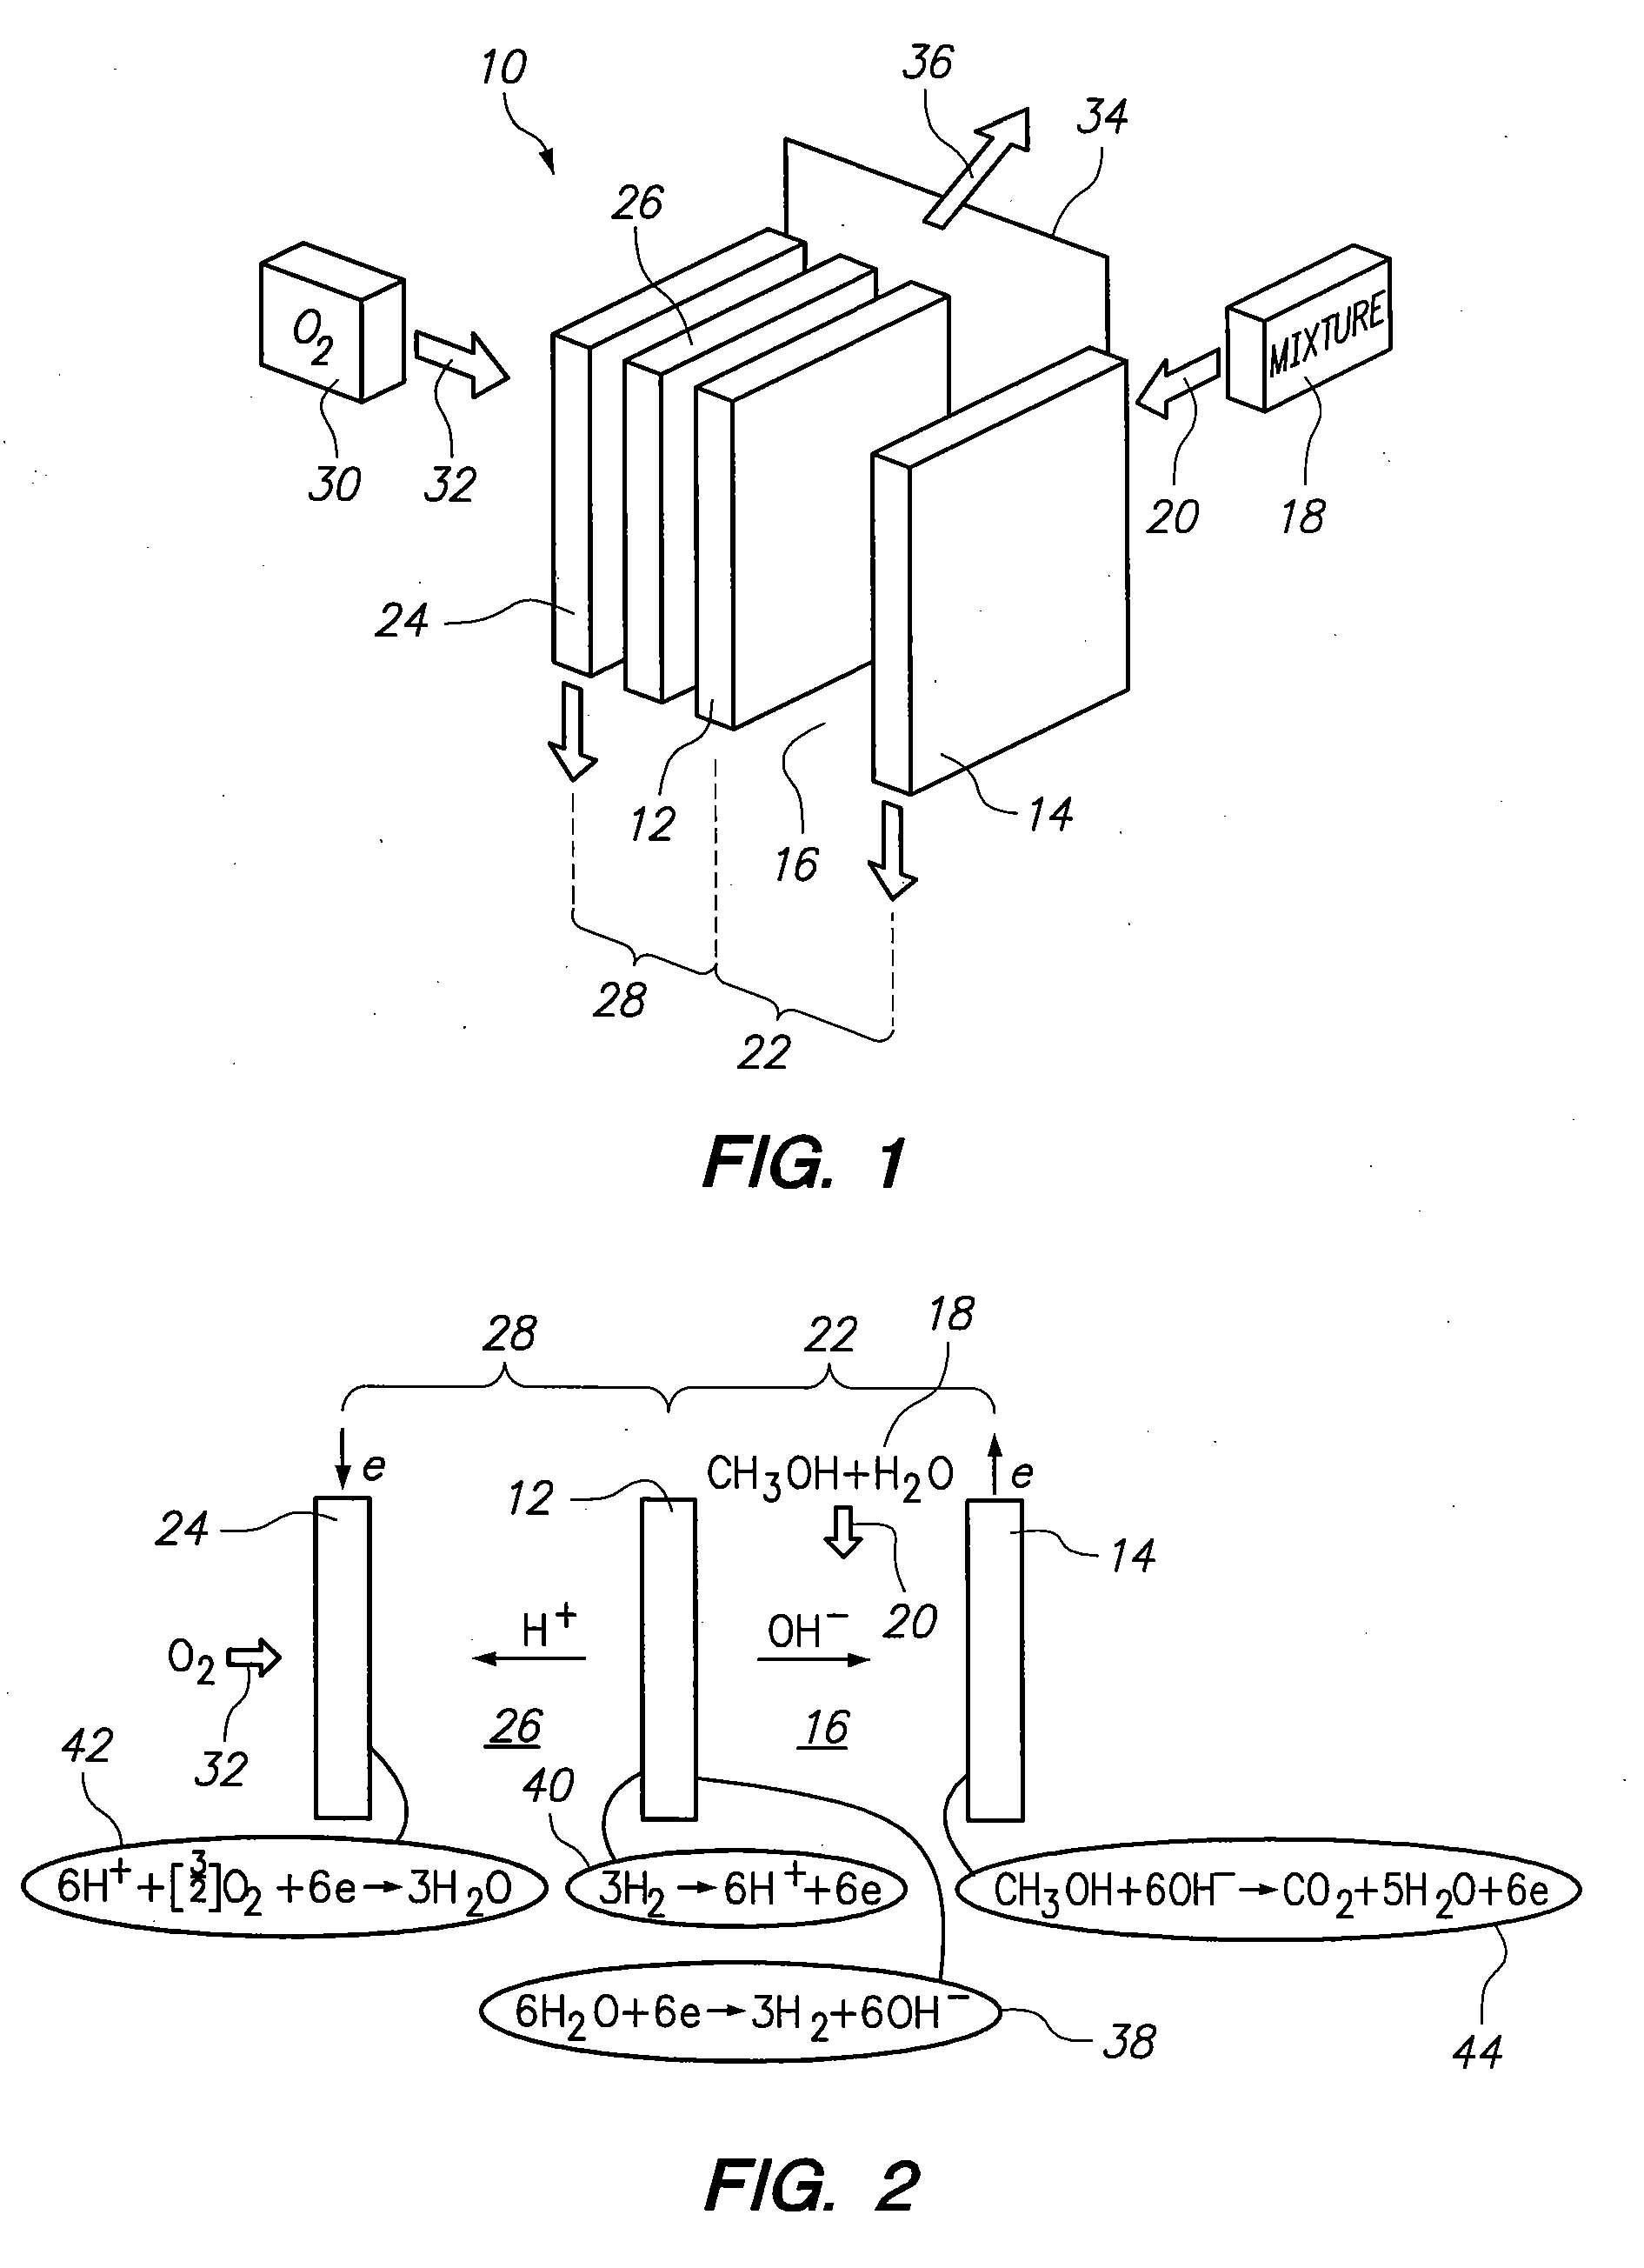 Hydrogen fuel cell with integrated reformer